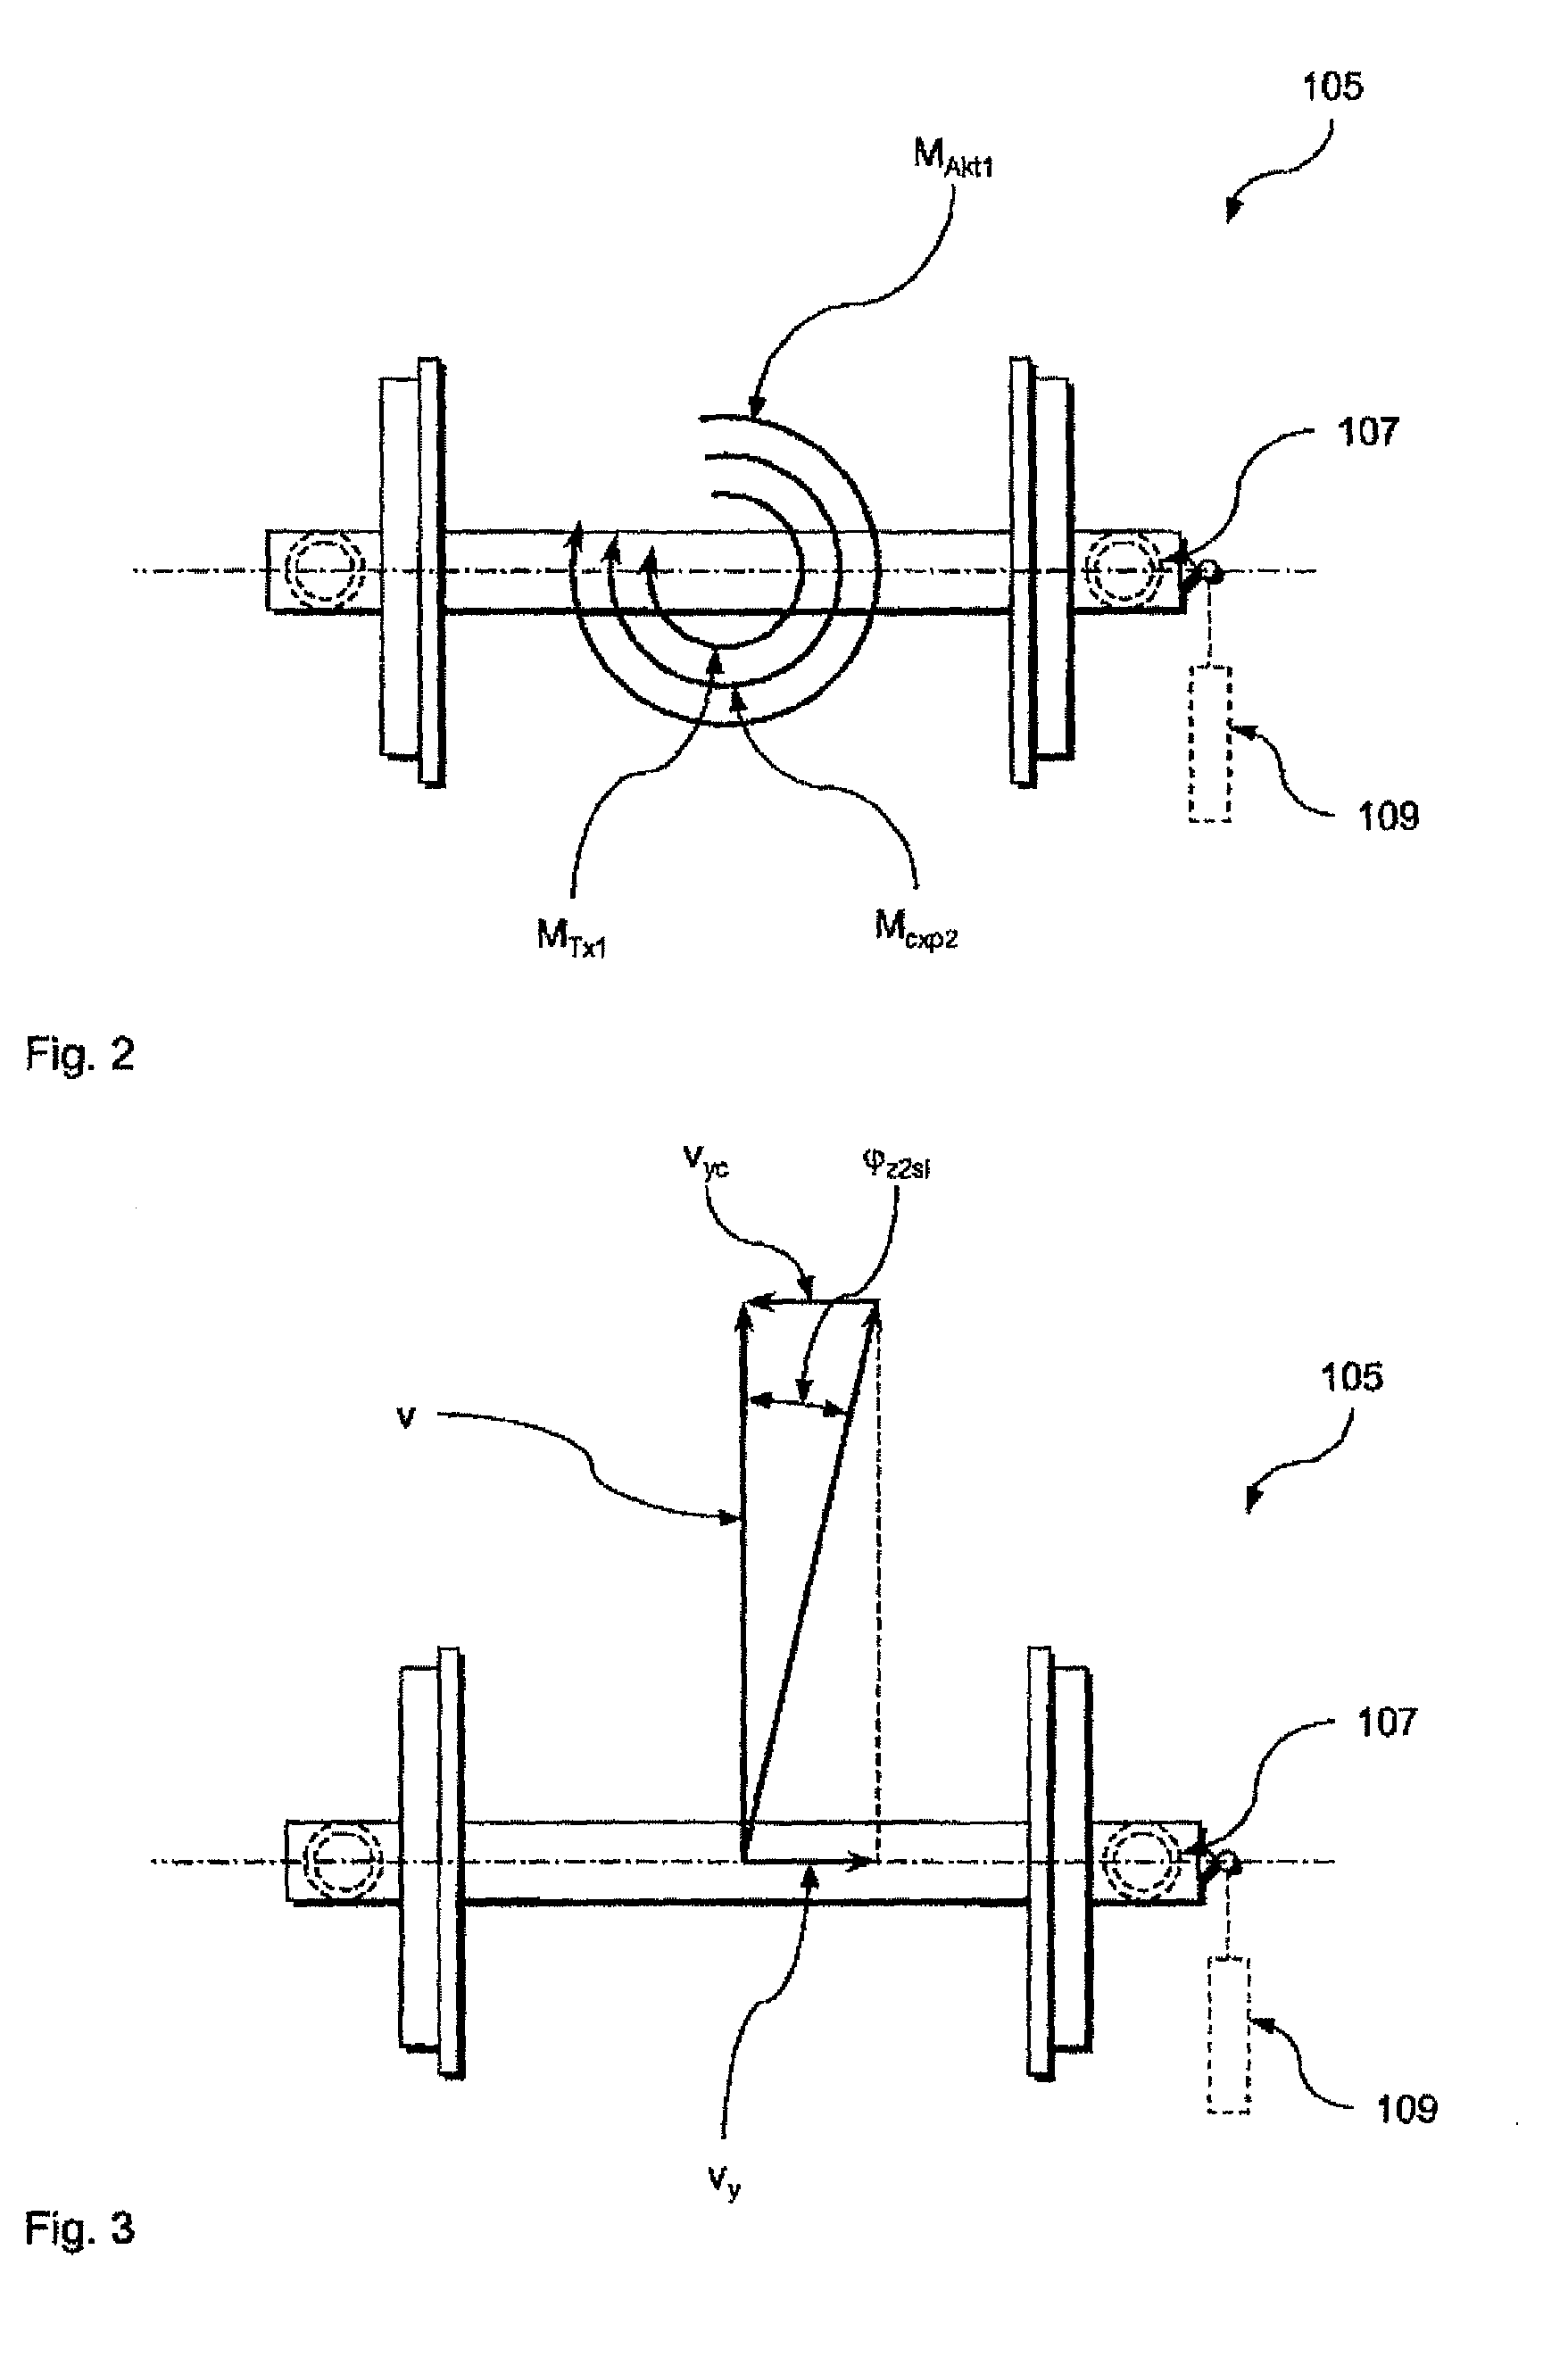 Method for controlling an active running gear of a rail vehicle